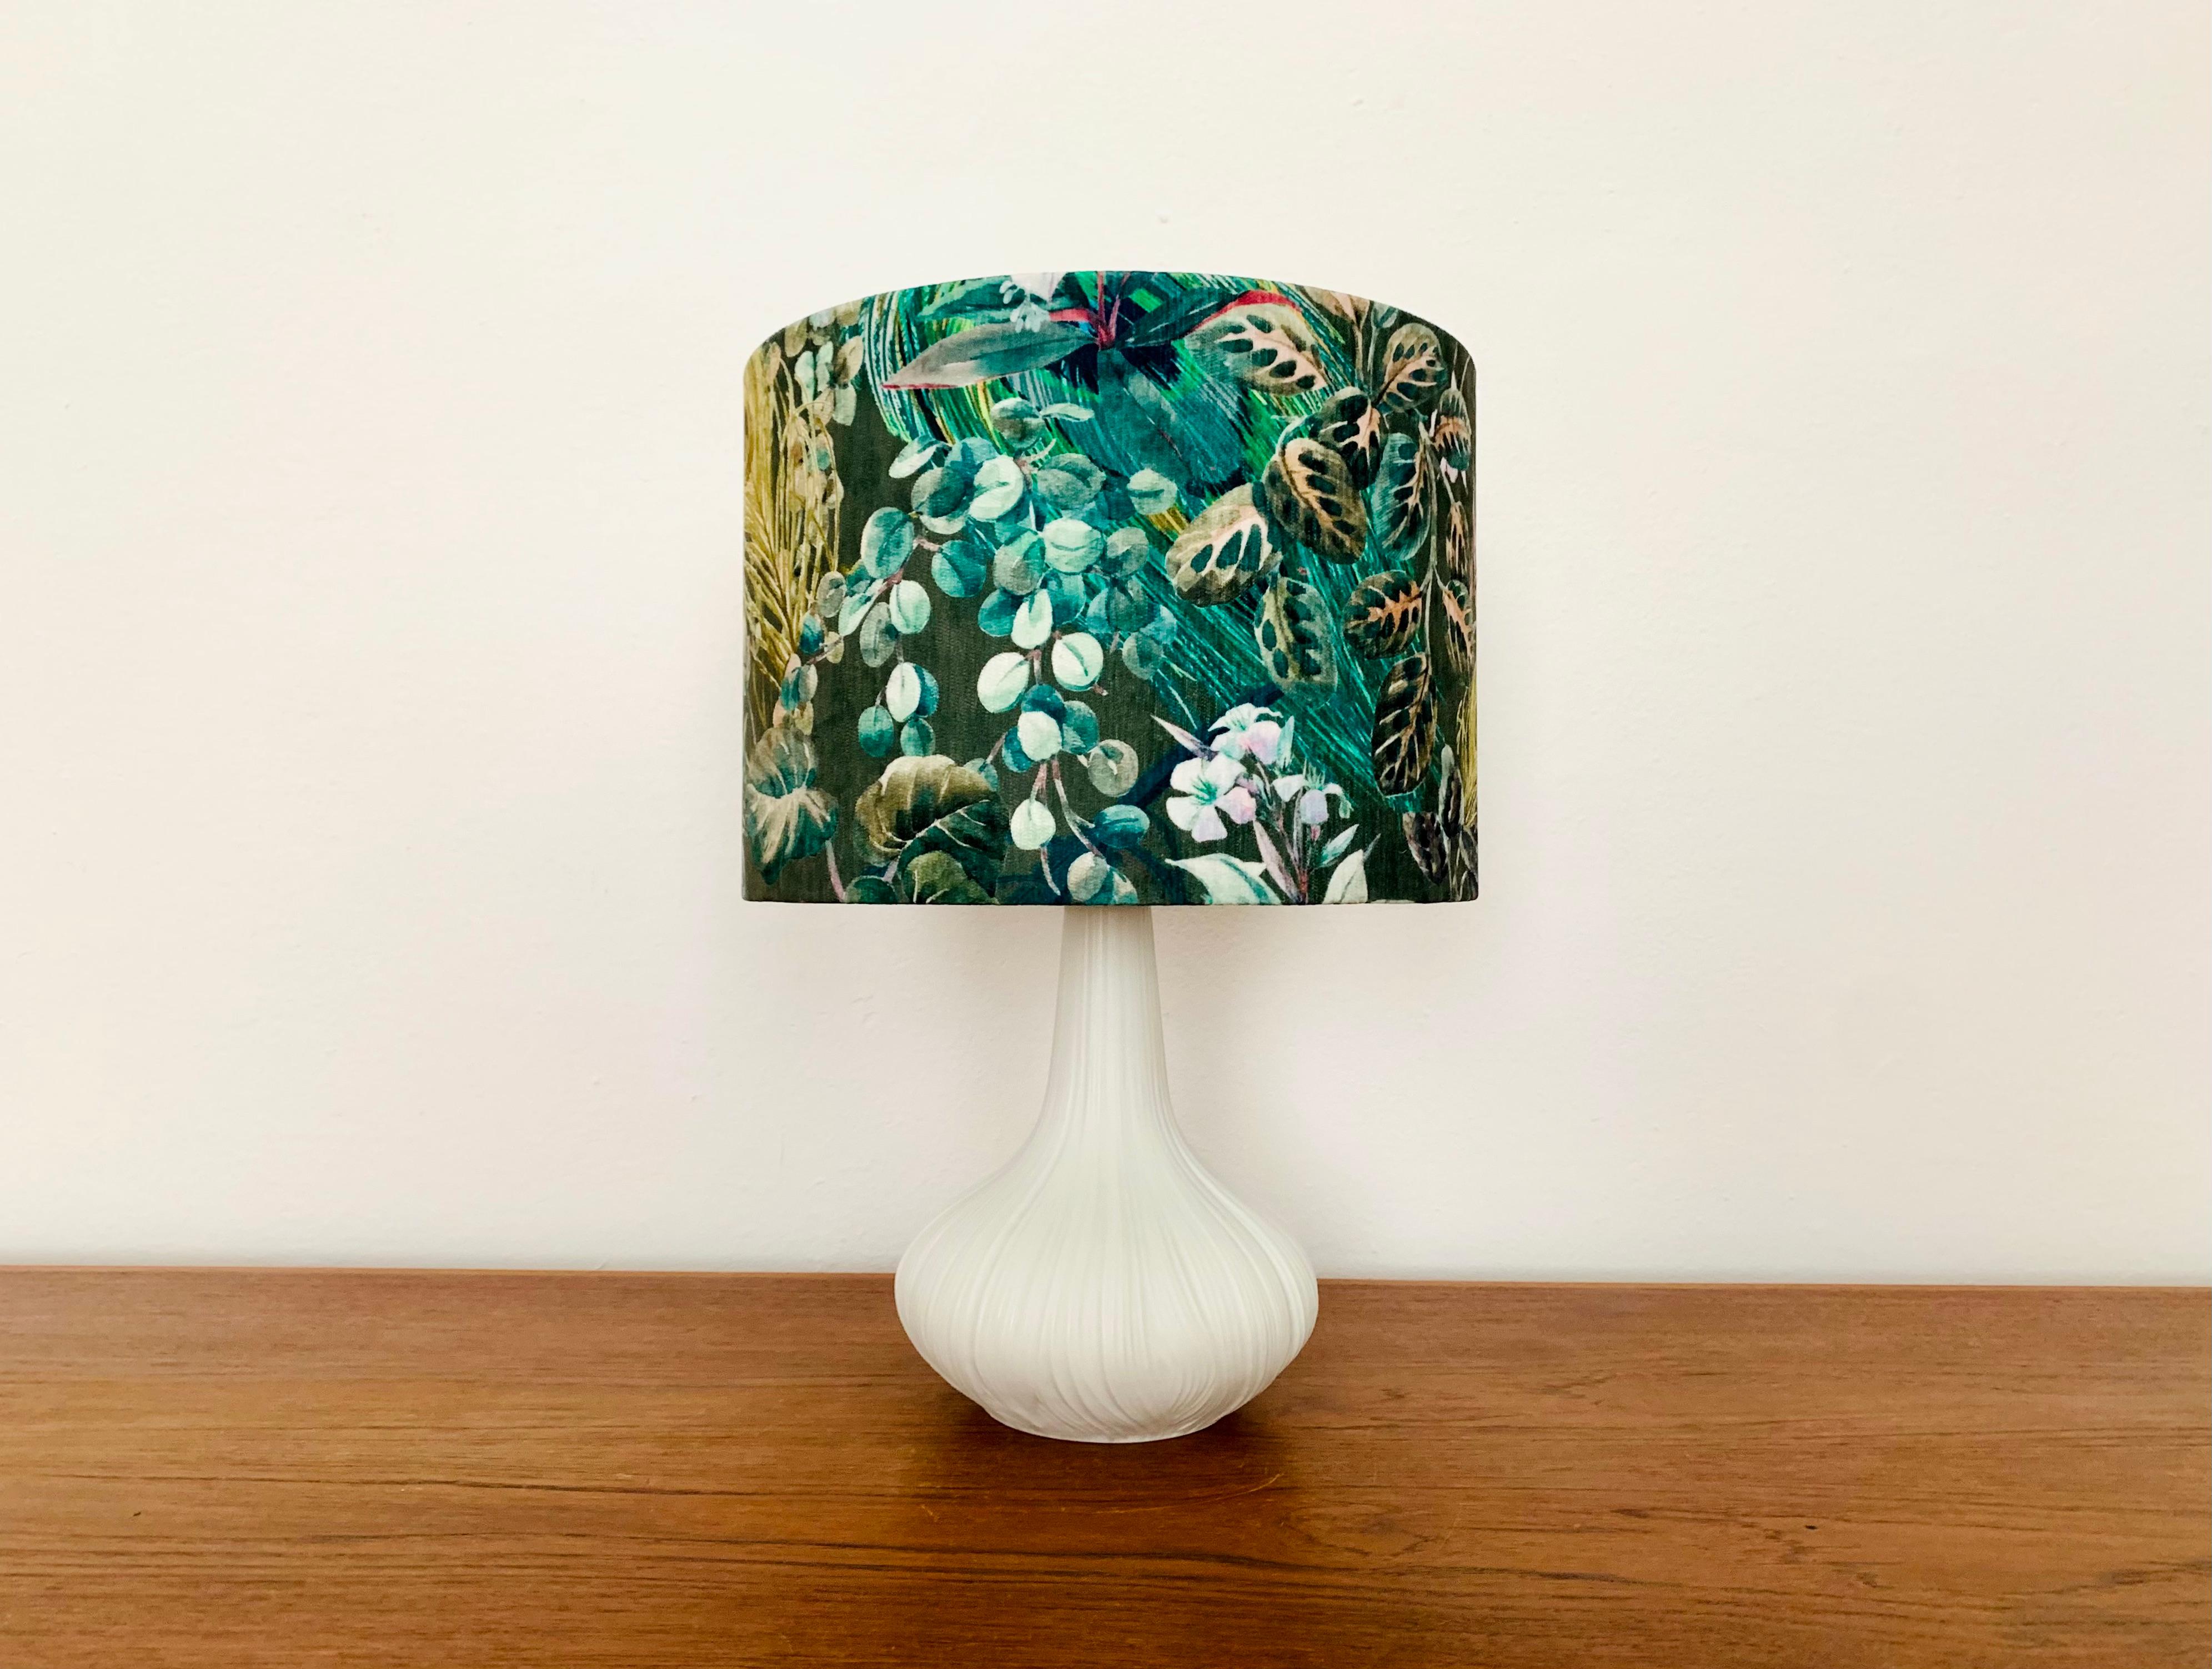 Impressive porcelain table lamp from the 1960s.
Extremely high-quality workmanship and very beautiful design.

Manufacturer: Rosenthal Studio Line

Condition:

Very good vintage condition with minimal signs of wear.
The lampshade is new.

The